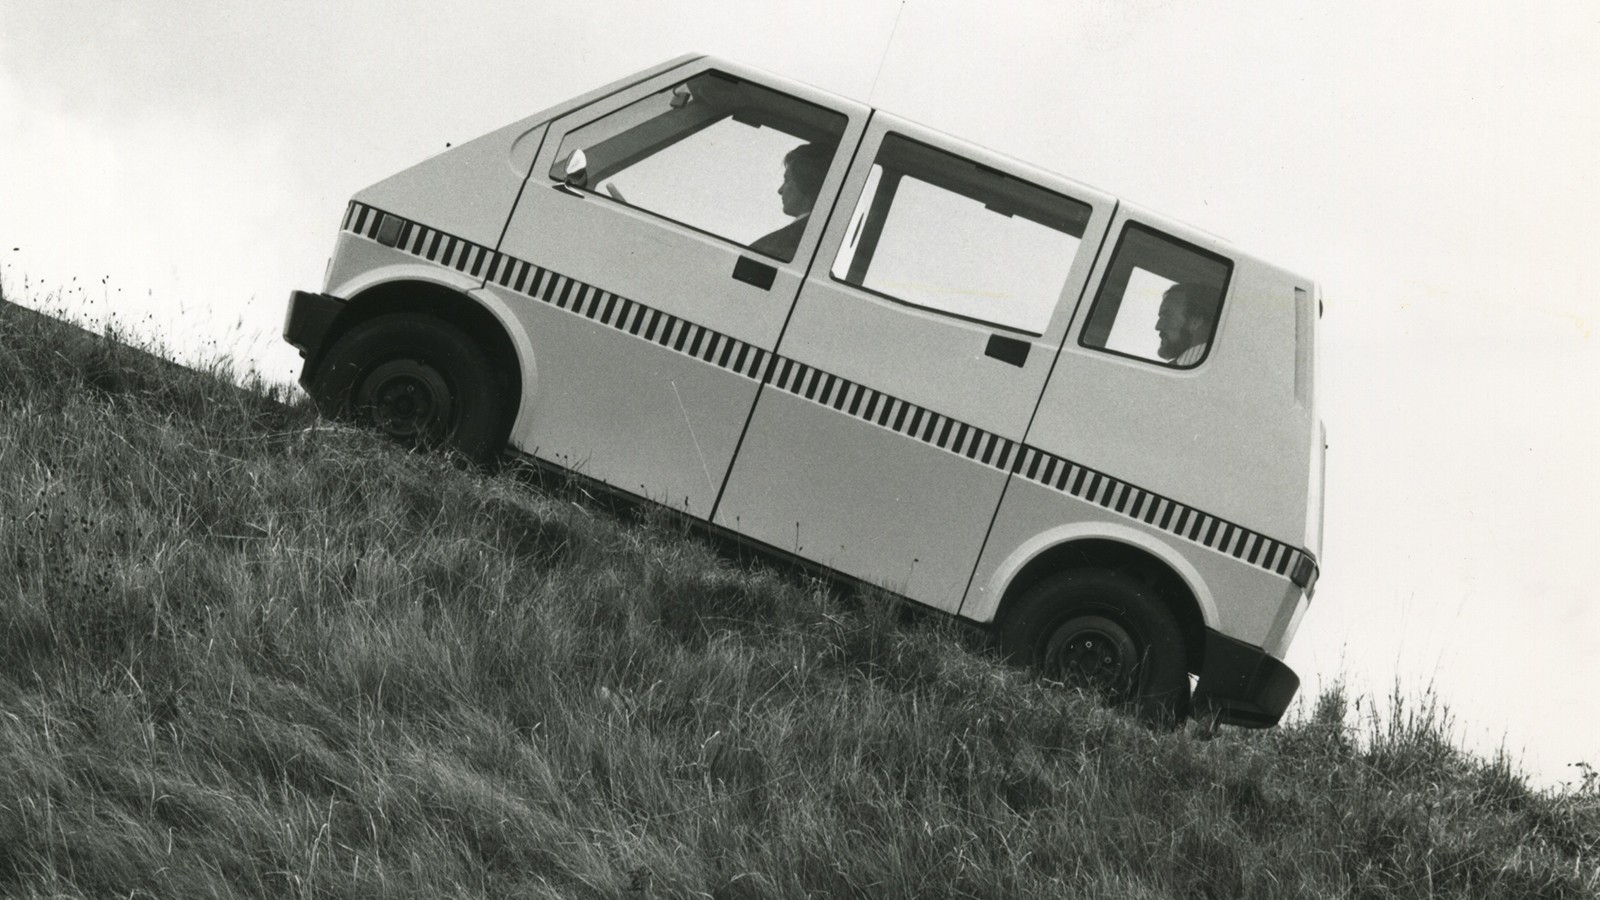 10 classic electric cars you never knew existed - Lucas Electric Taxi